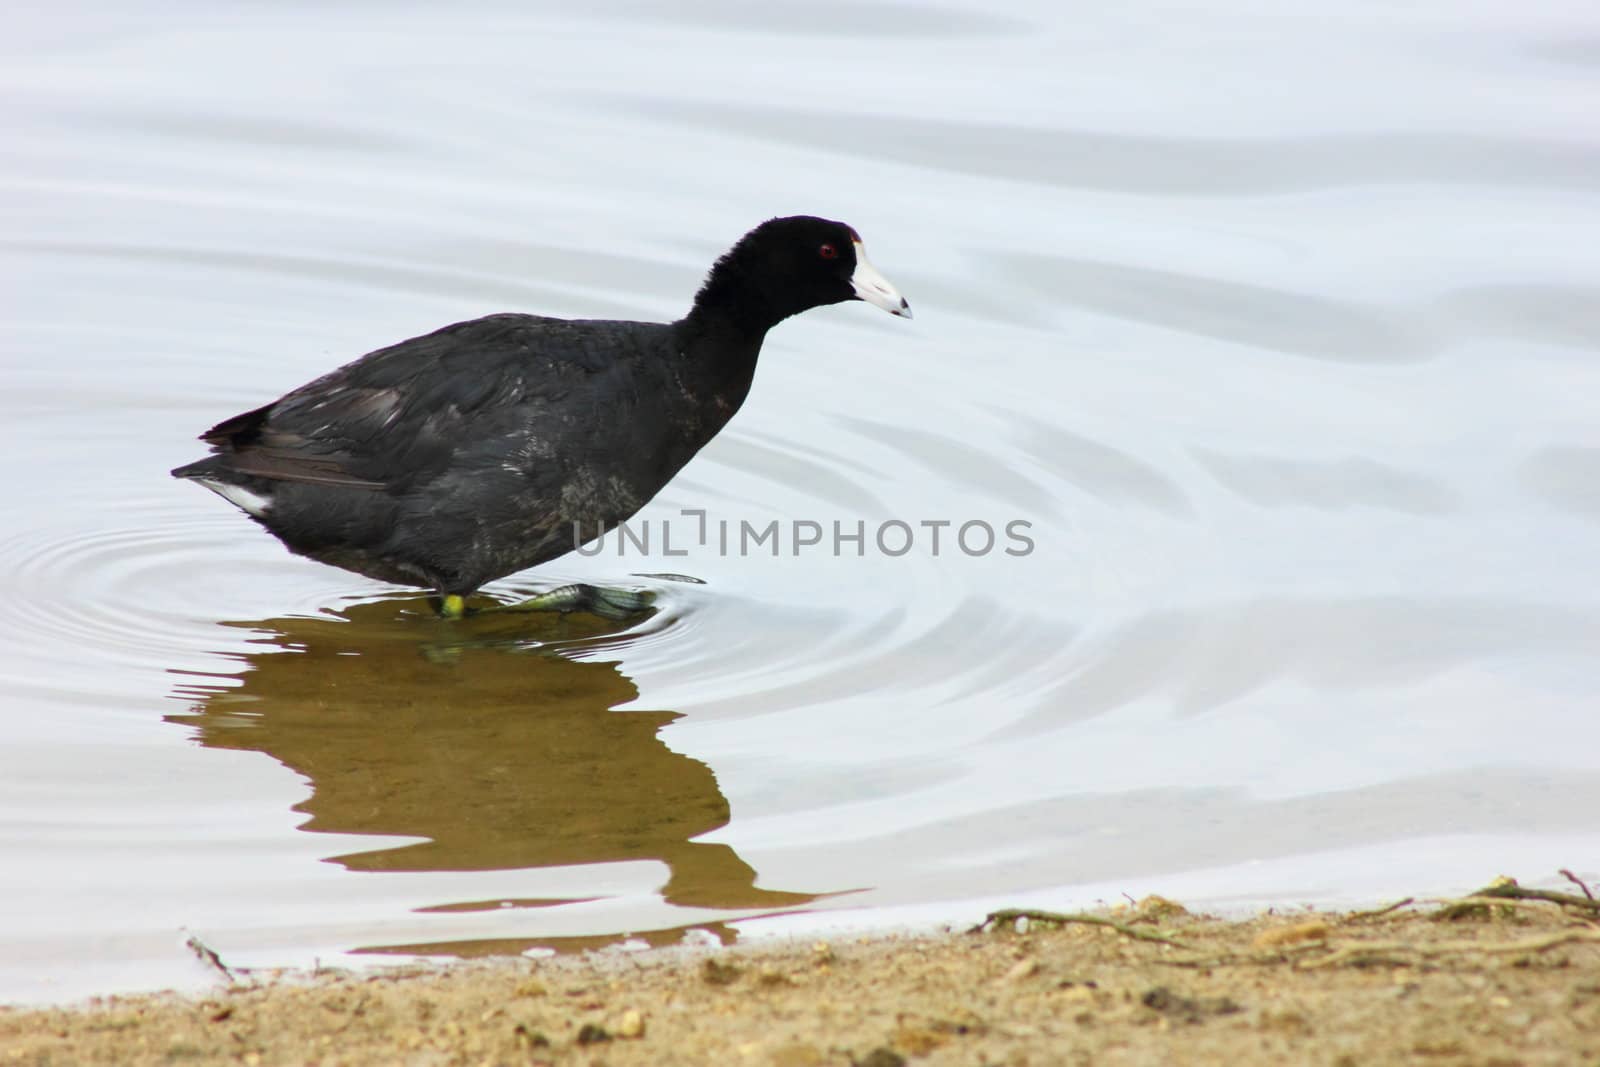 American coot wading through the shallow water.